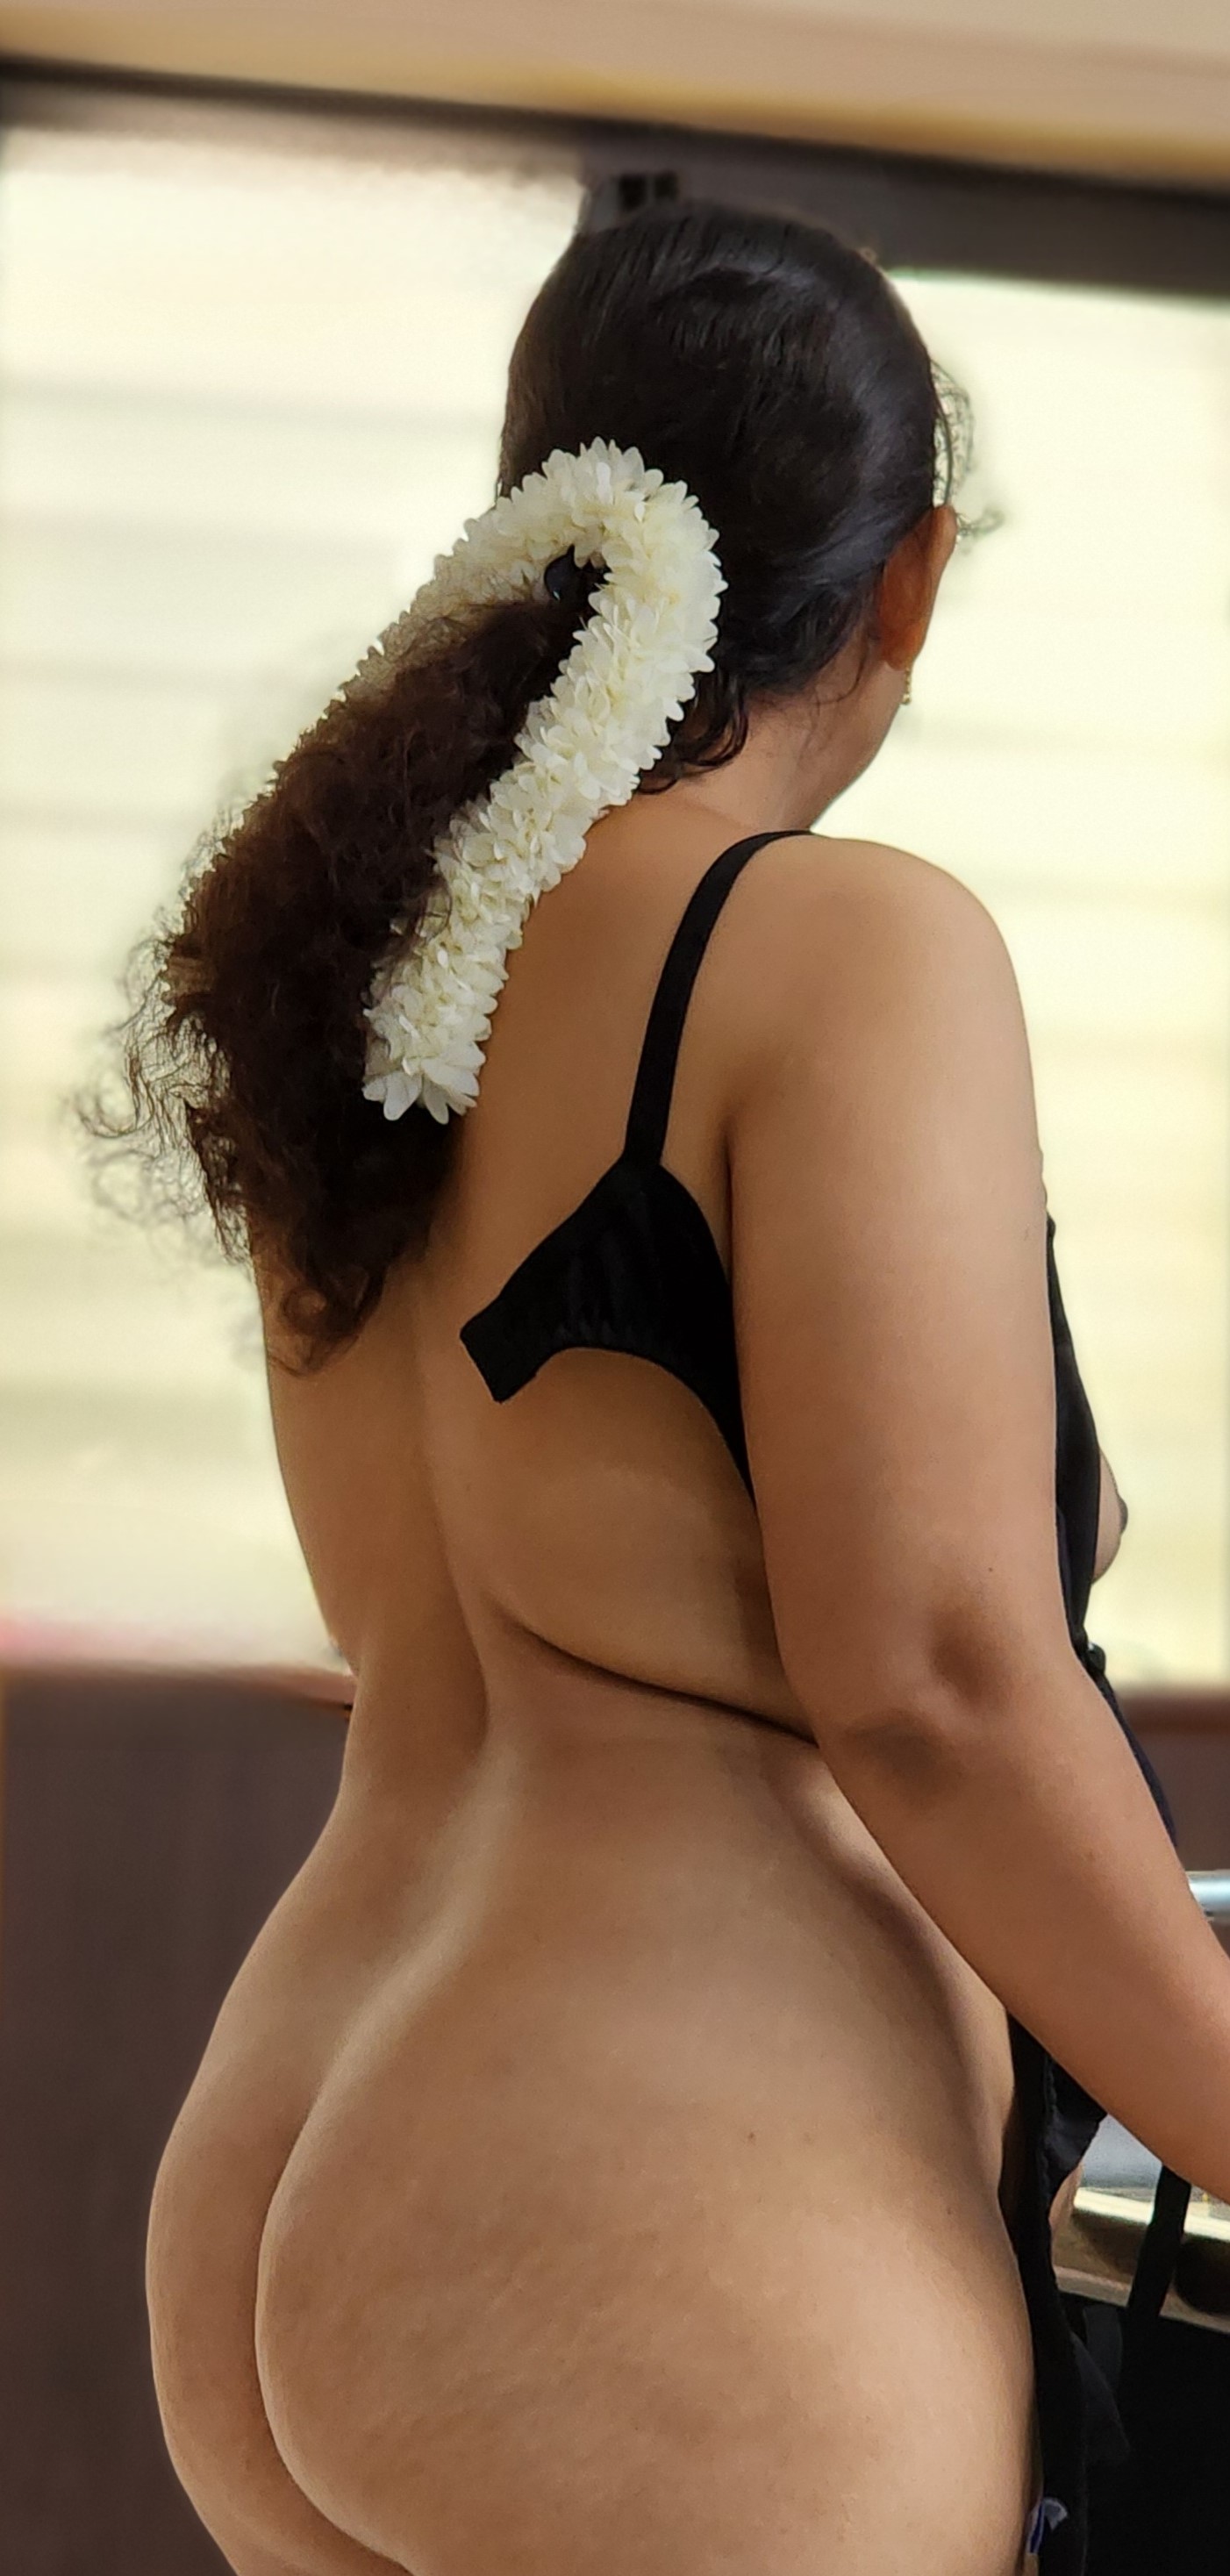 southindian wife